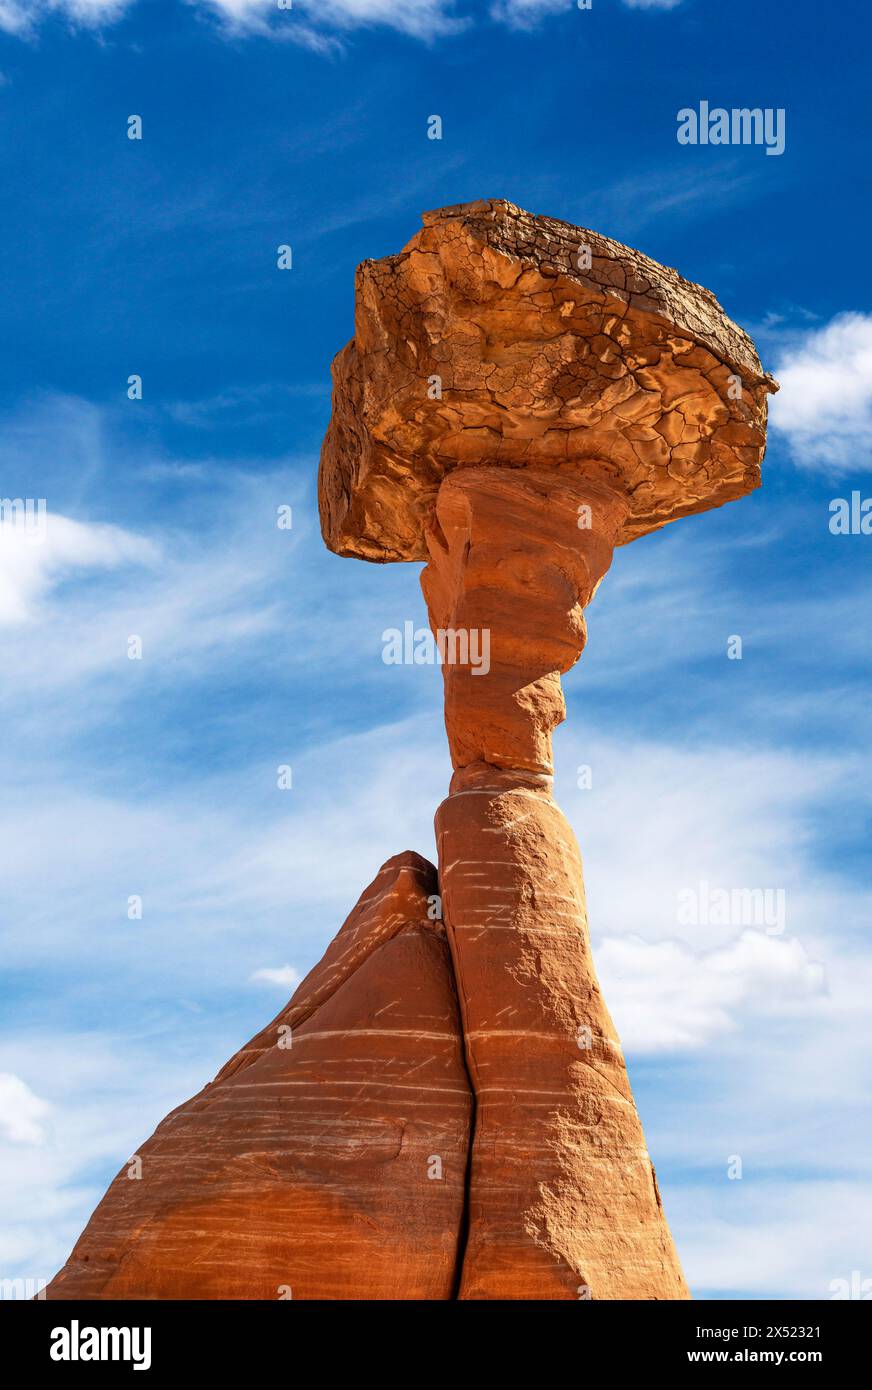 White and red sandstone toadstool hoodoo at Kanab Utah showing highly eroded spires and balanced harder rock on top framed by a blue sky. Stock Photo